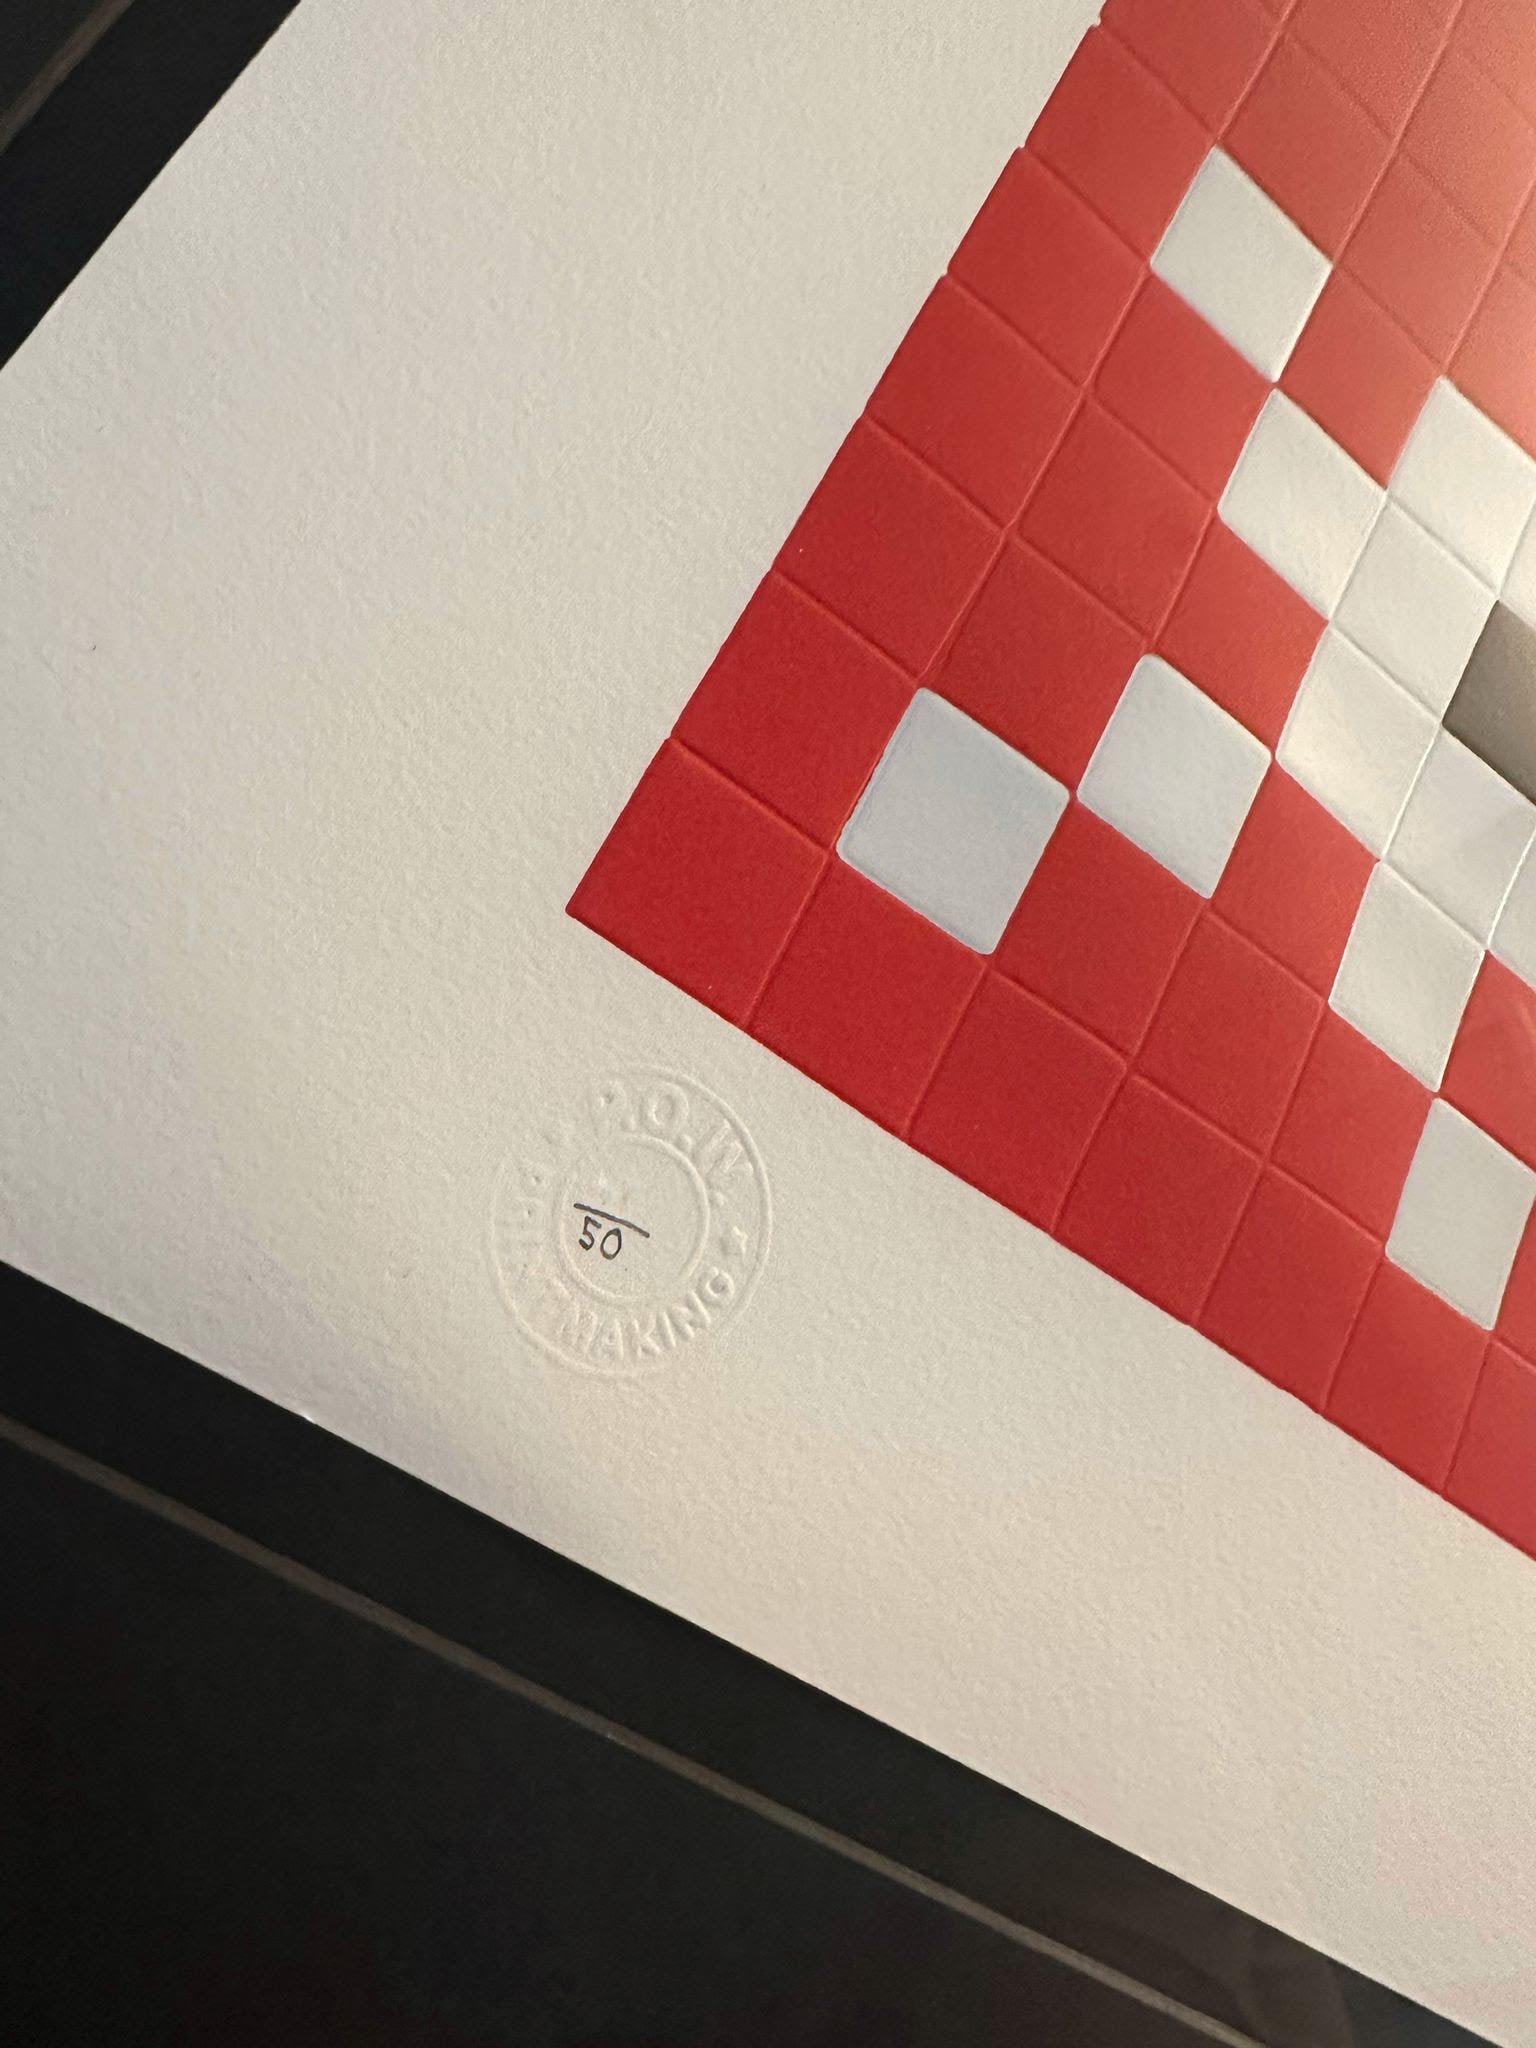 Invader Invasion red print in a black box frame close up of the pricture on walls stamp